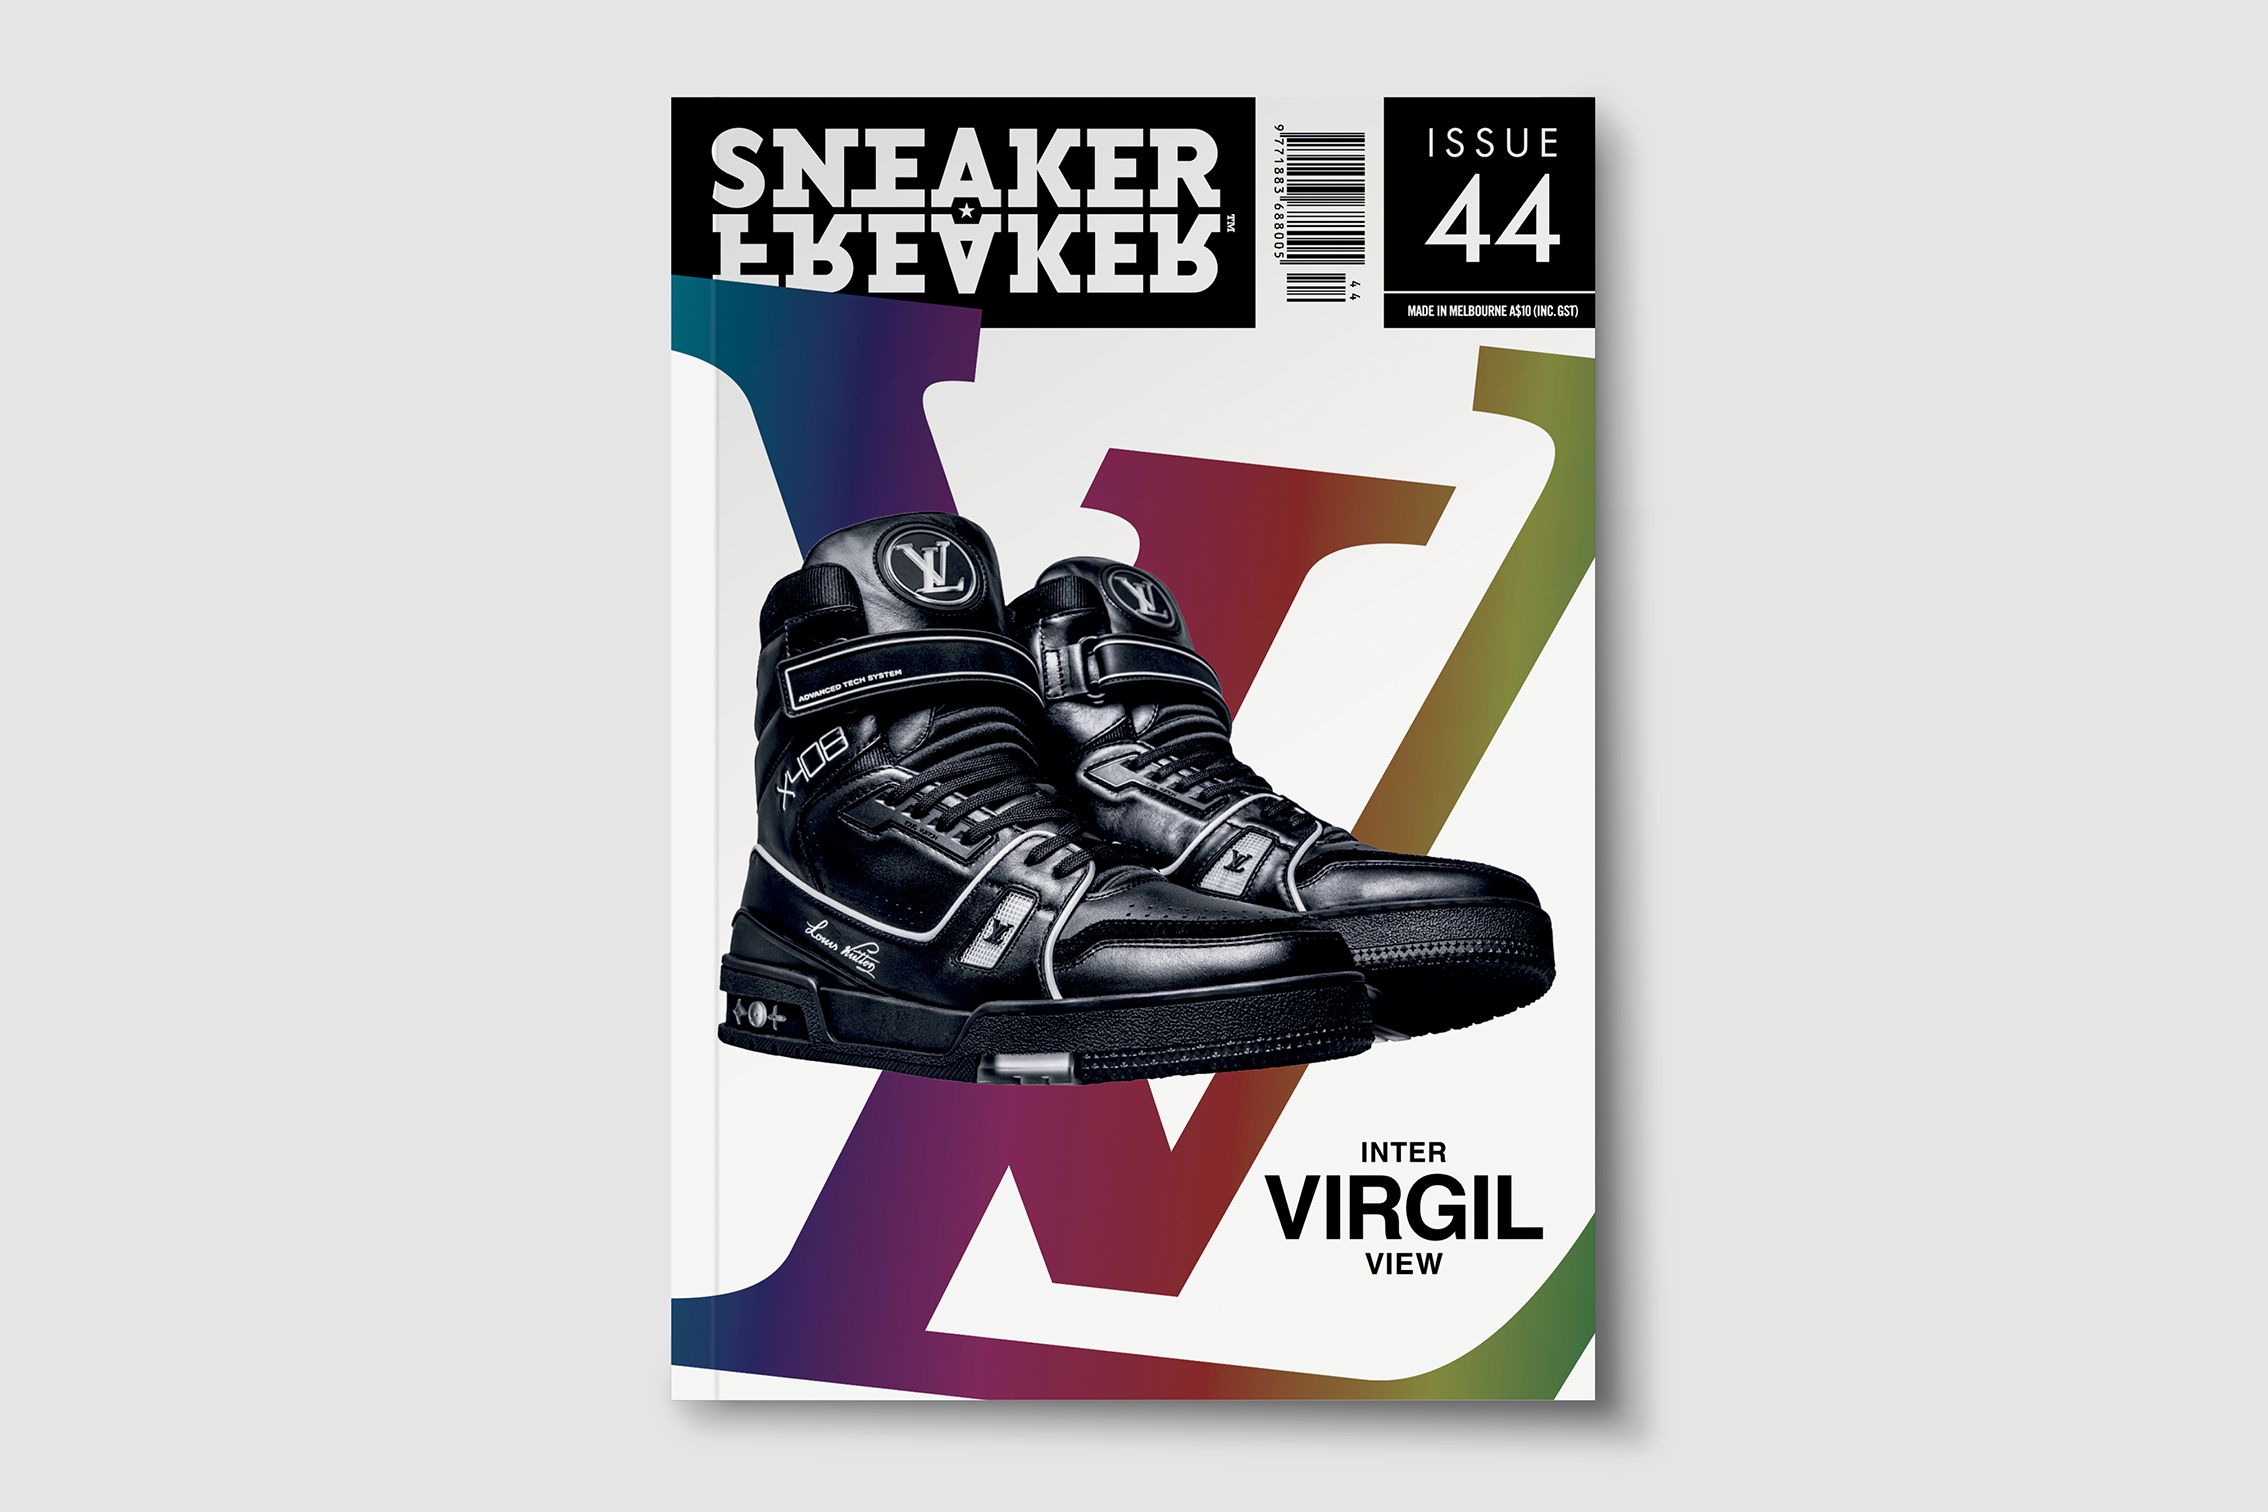 CmimShops - Comin' in Hot: CmimShops Issue 44 is Out Now! - adidas